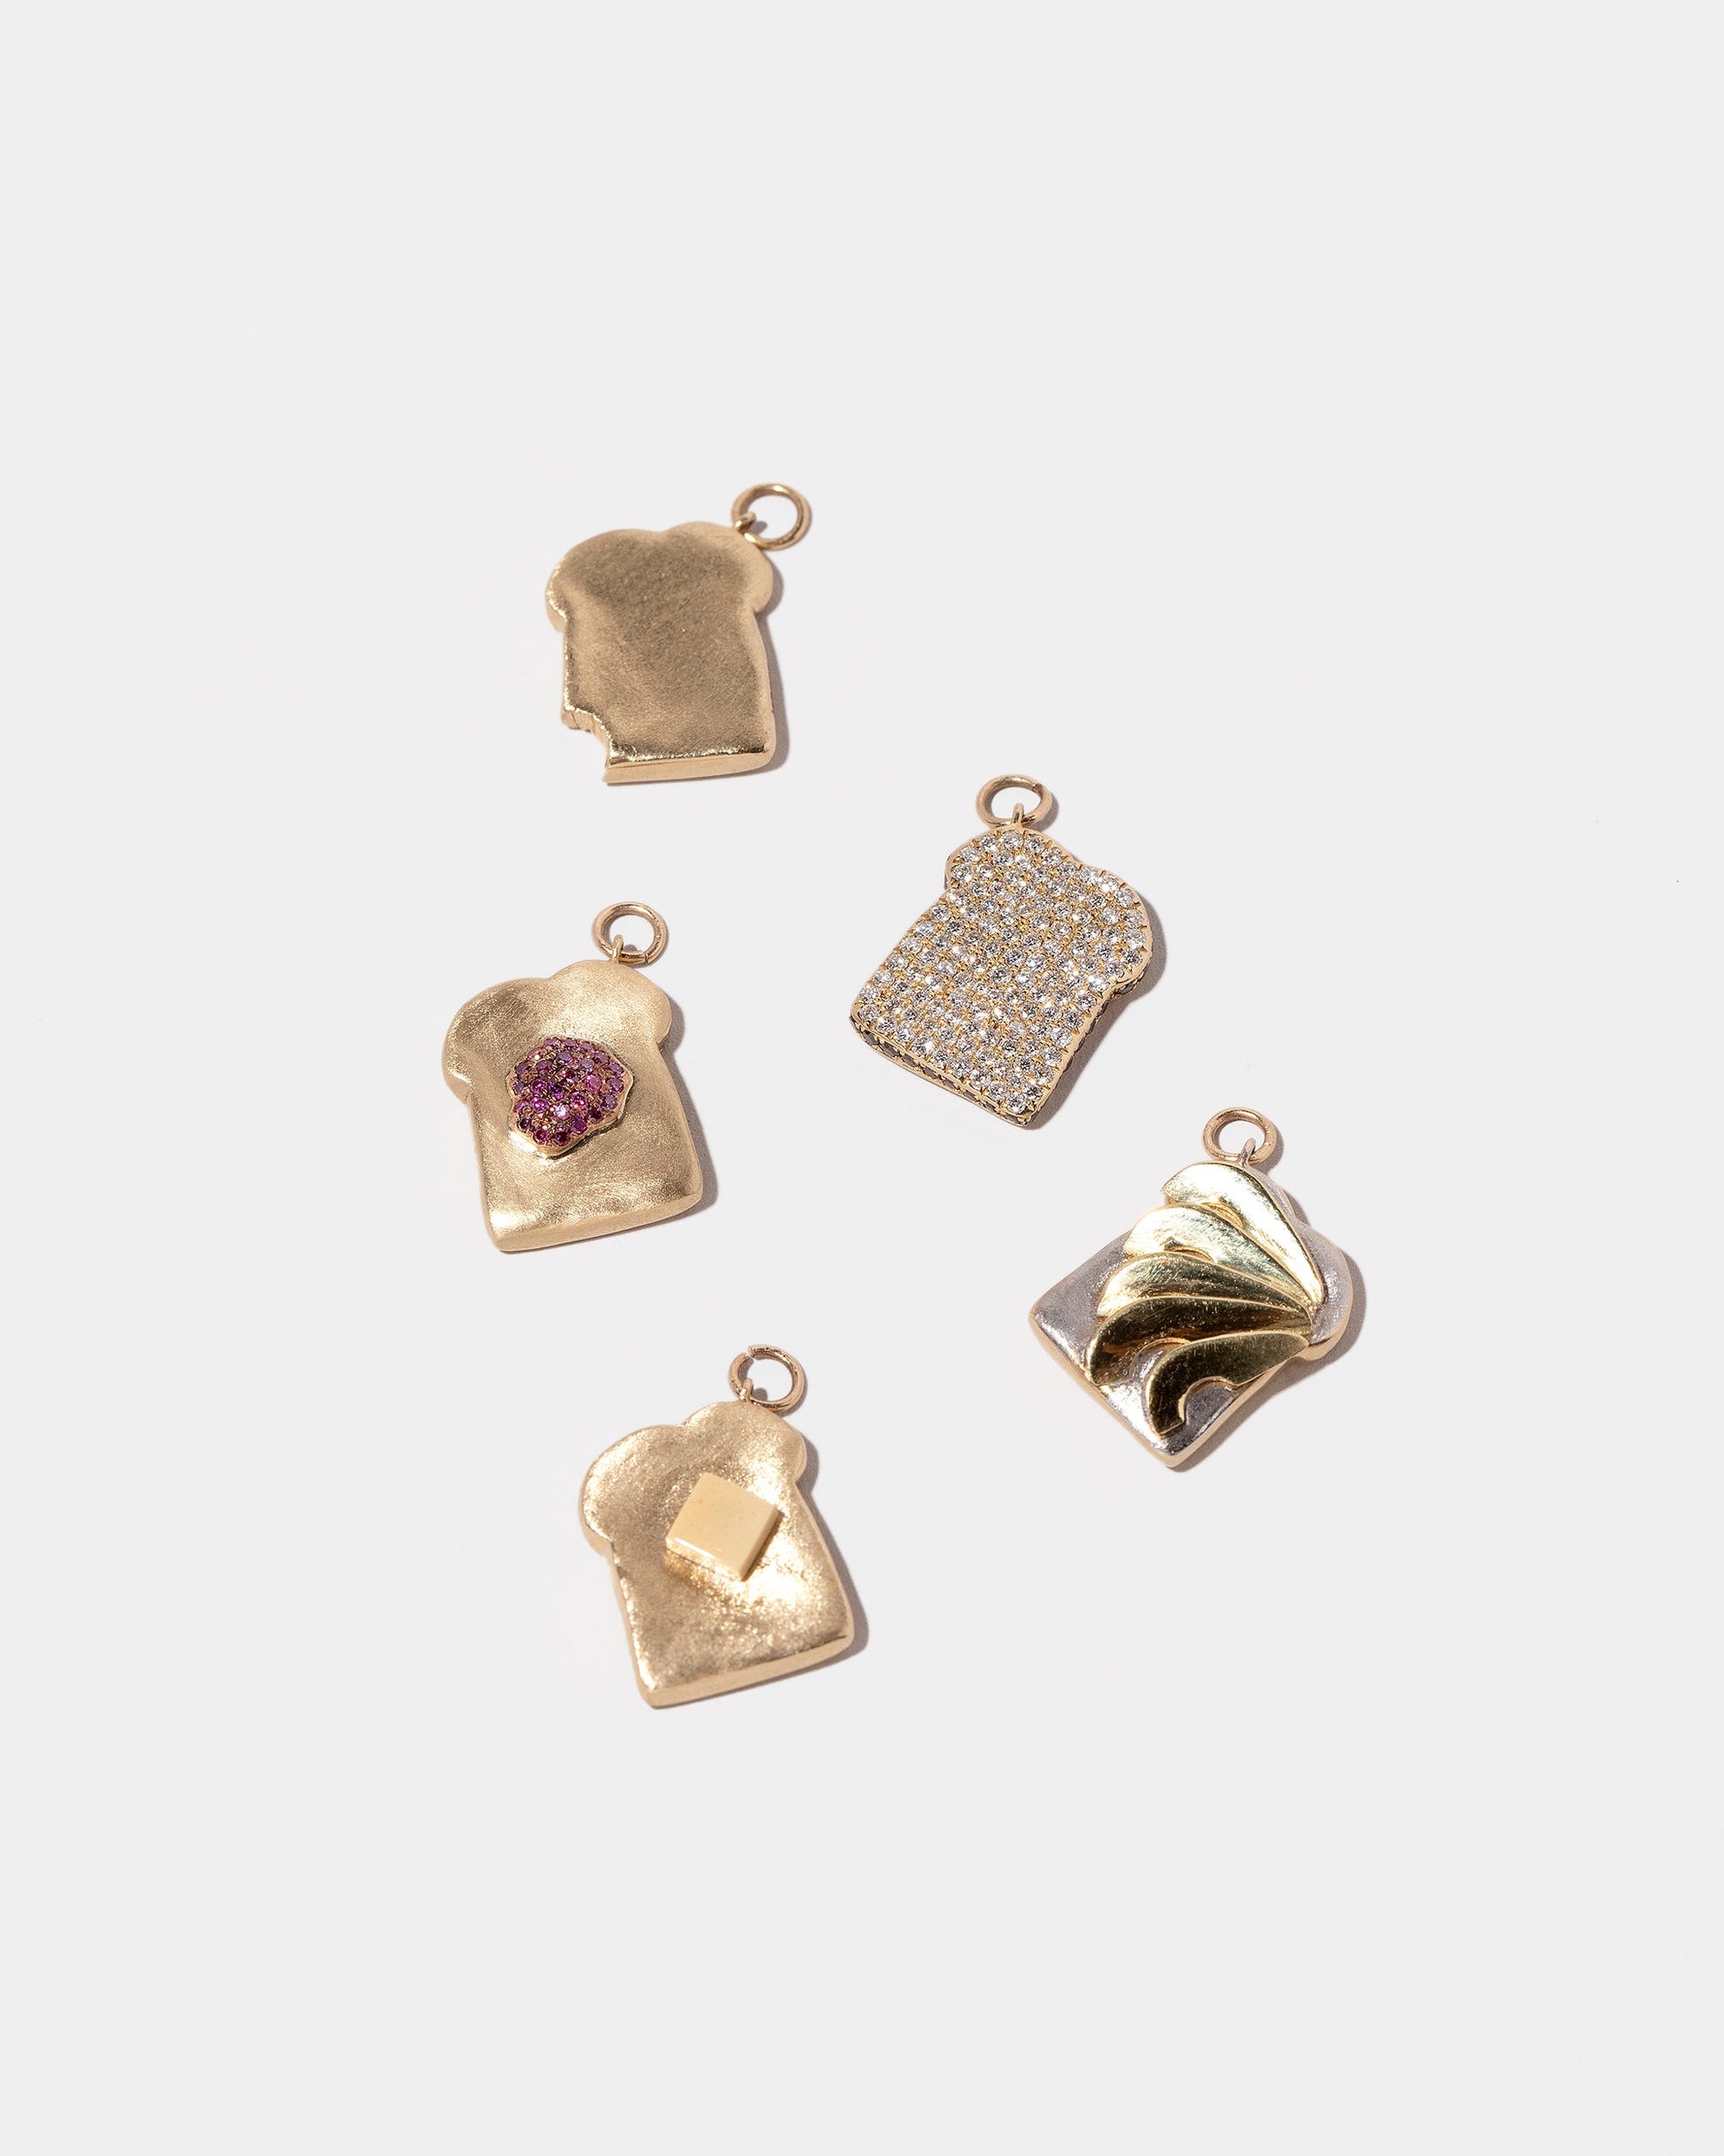  Group of Toast Charms on light color background.